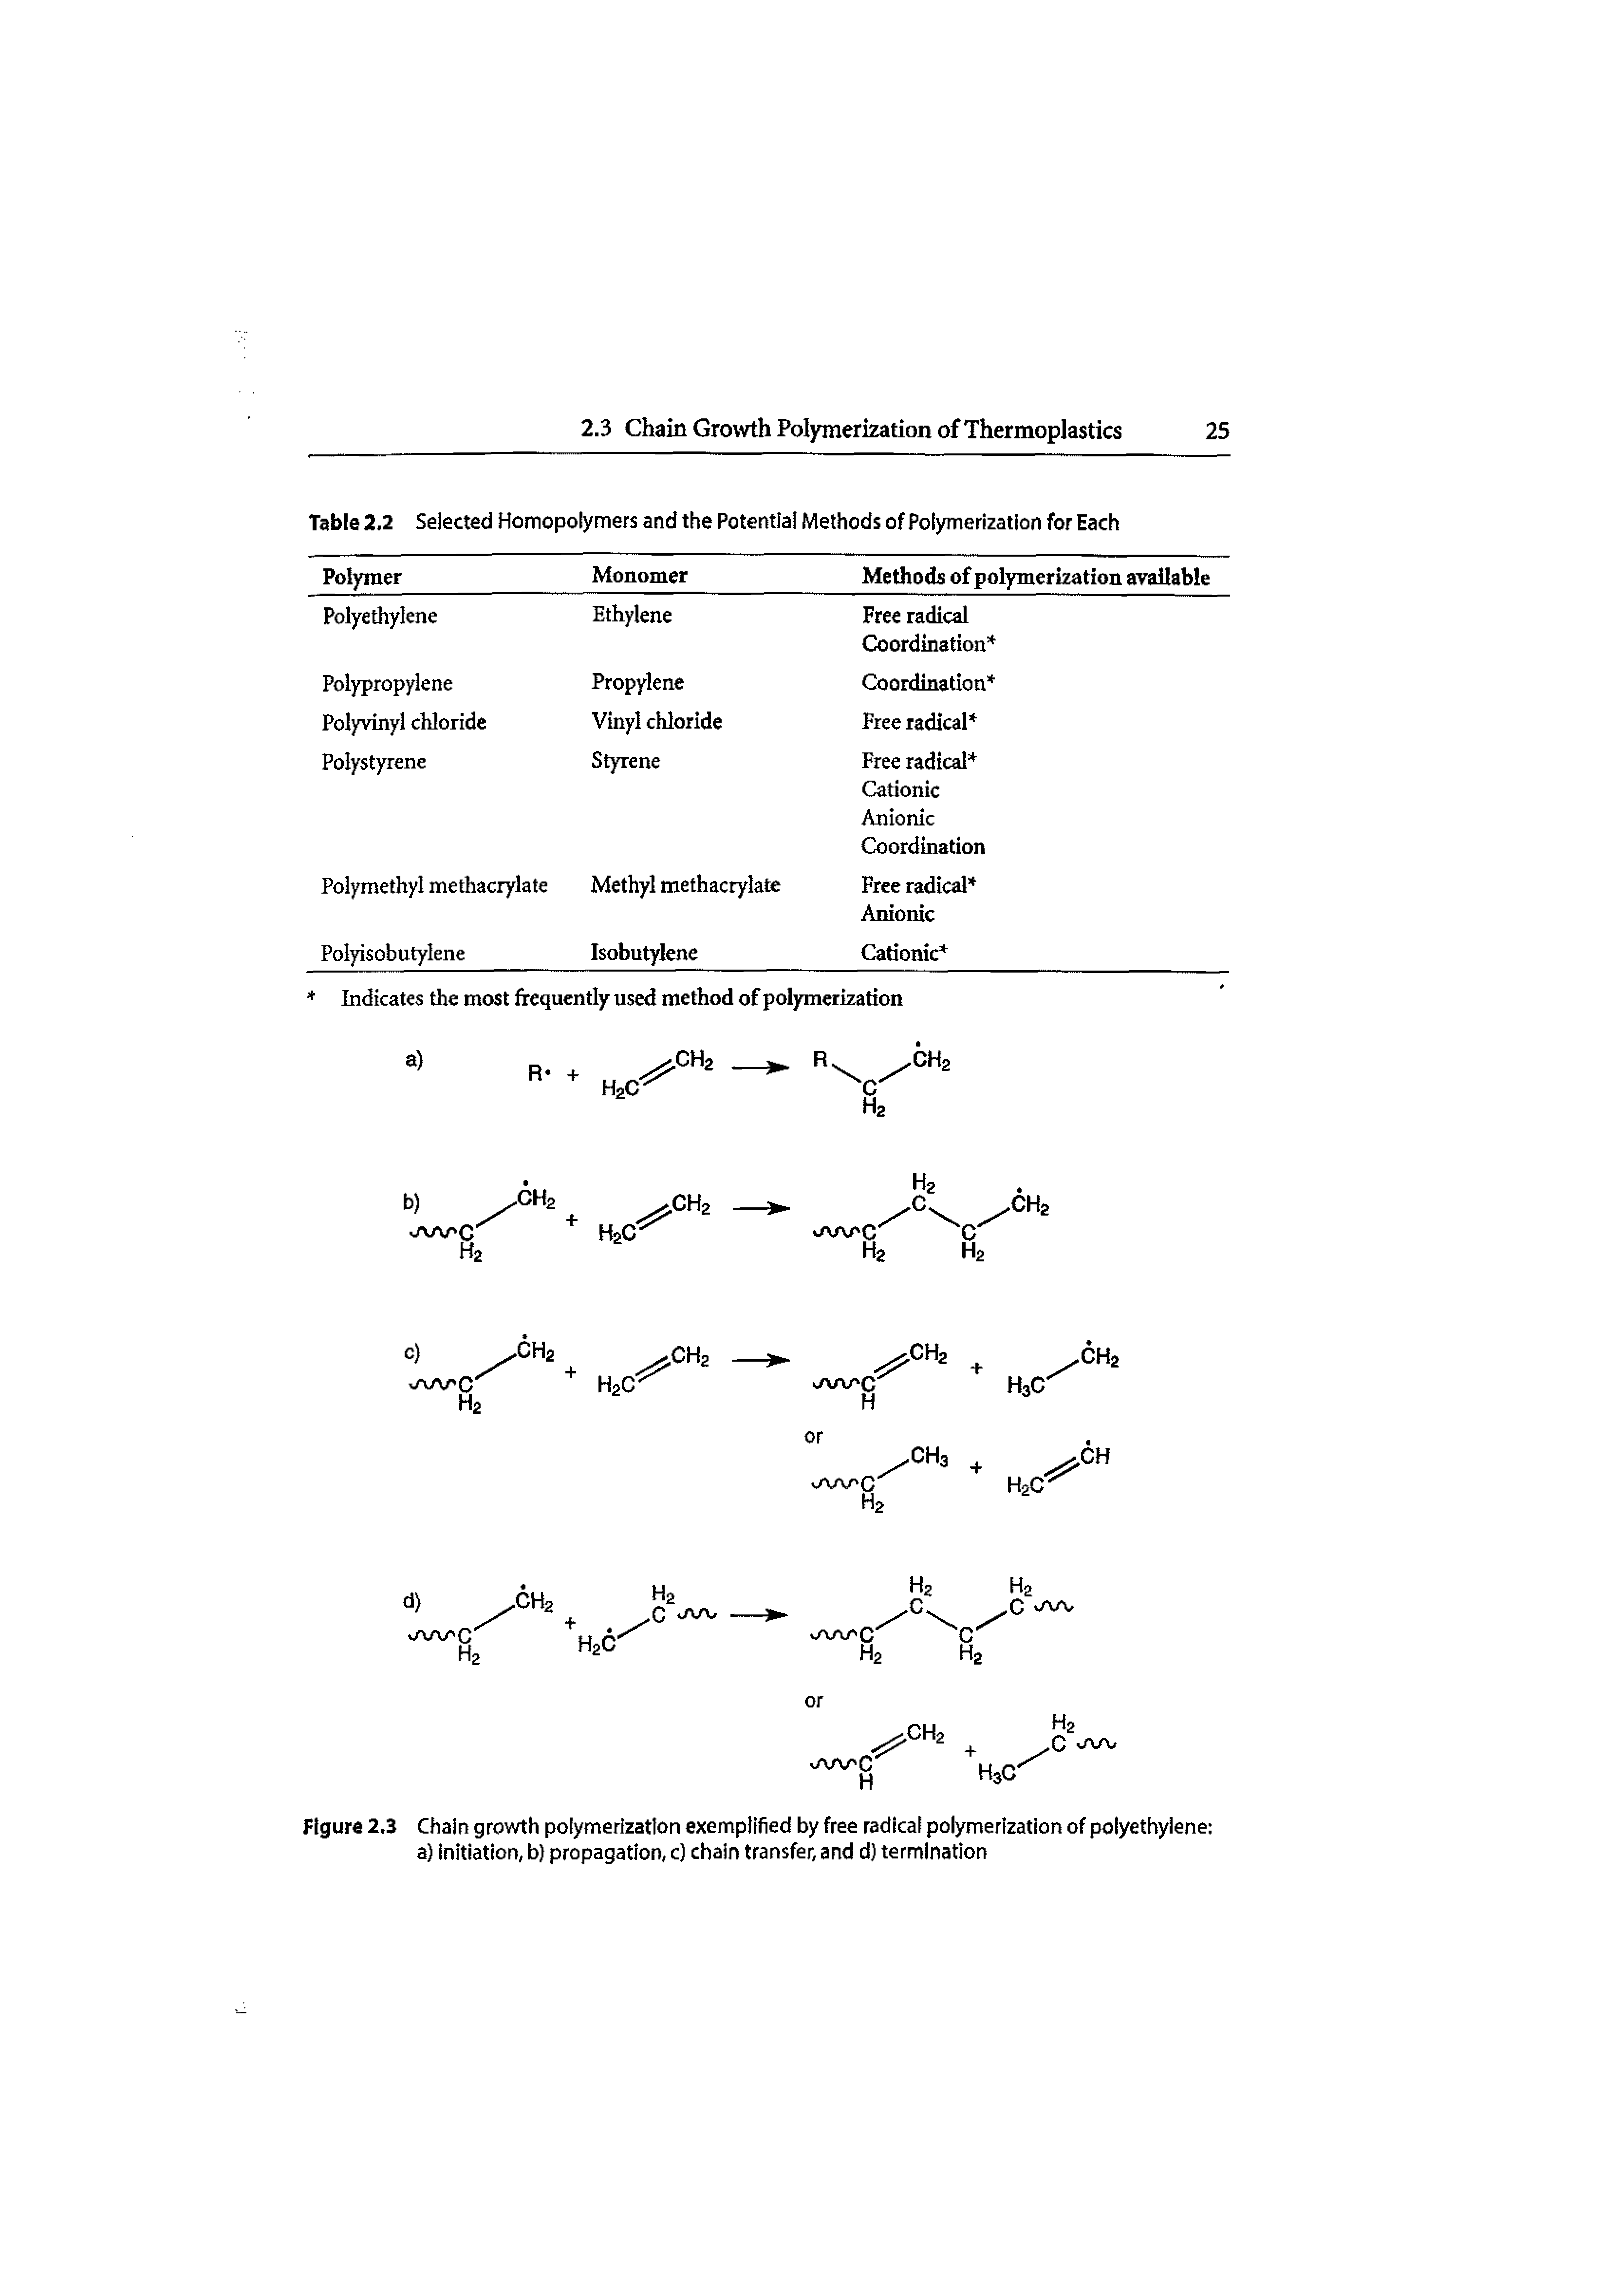 Figure 2,3 Chain growth polymerization exemplified by free radical polymerization of polyethylene a) initiation, b) propagation, c) chain transfer, and d) termination...